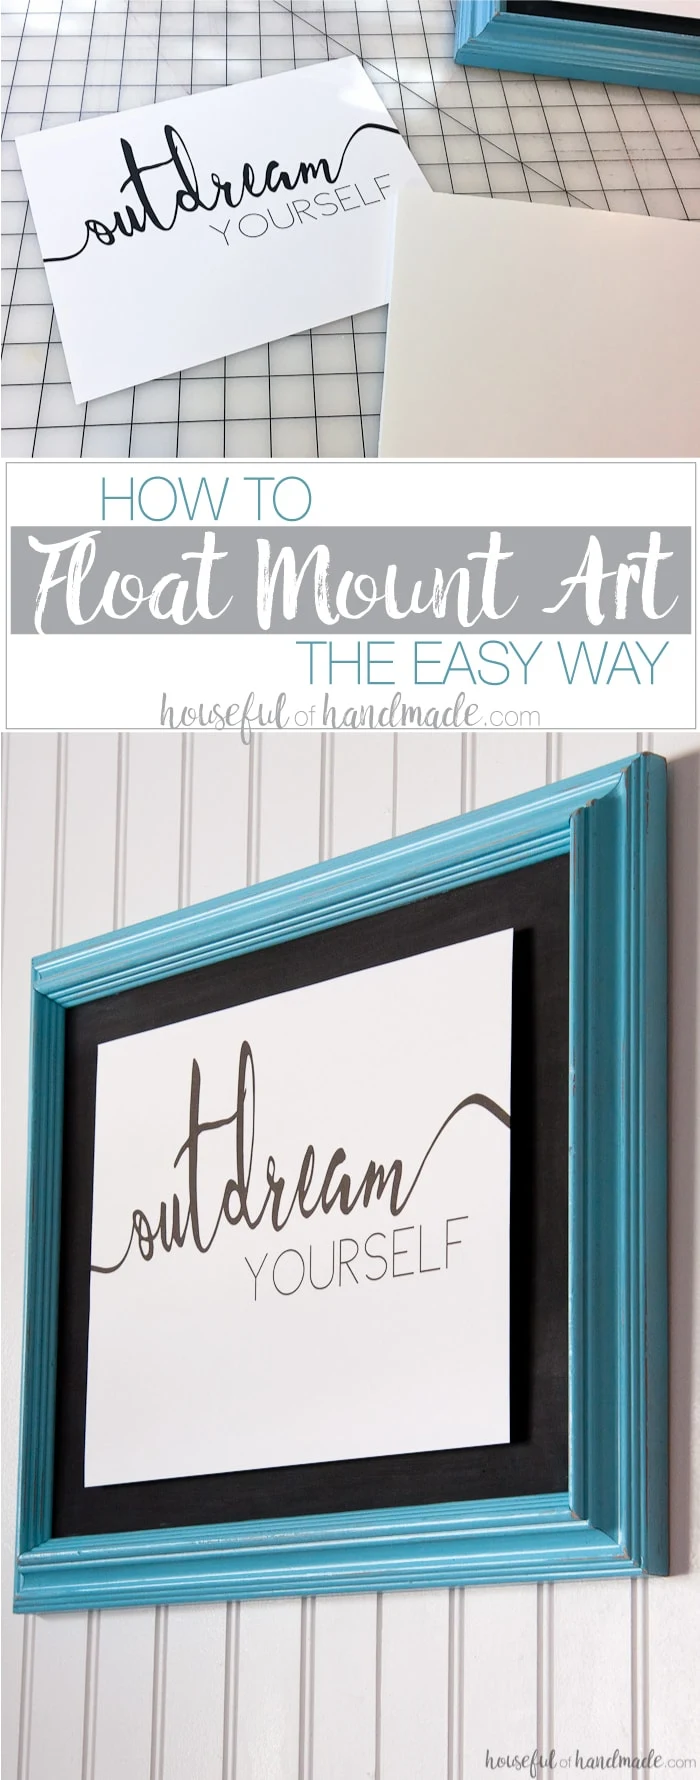 Add dimension to your gallery wall by learning how to float mount art the easy way. No specialized supplies needed, instead for a couple dollars you can have the high end float mount look in minutes. Housefulofhandmade.com | Mounting Art | Inexpensive Art Ideas | Gallery Wall Ideas | DIY Float Mount | Floating Art | Wall Sayings | $100 Room Challenge